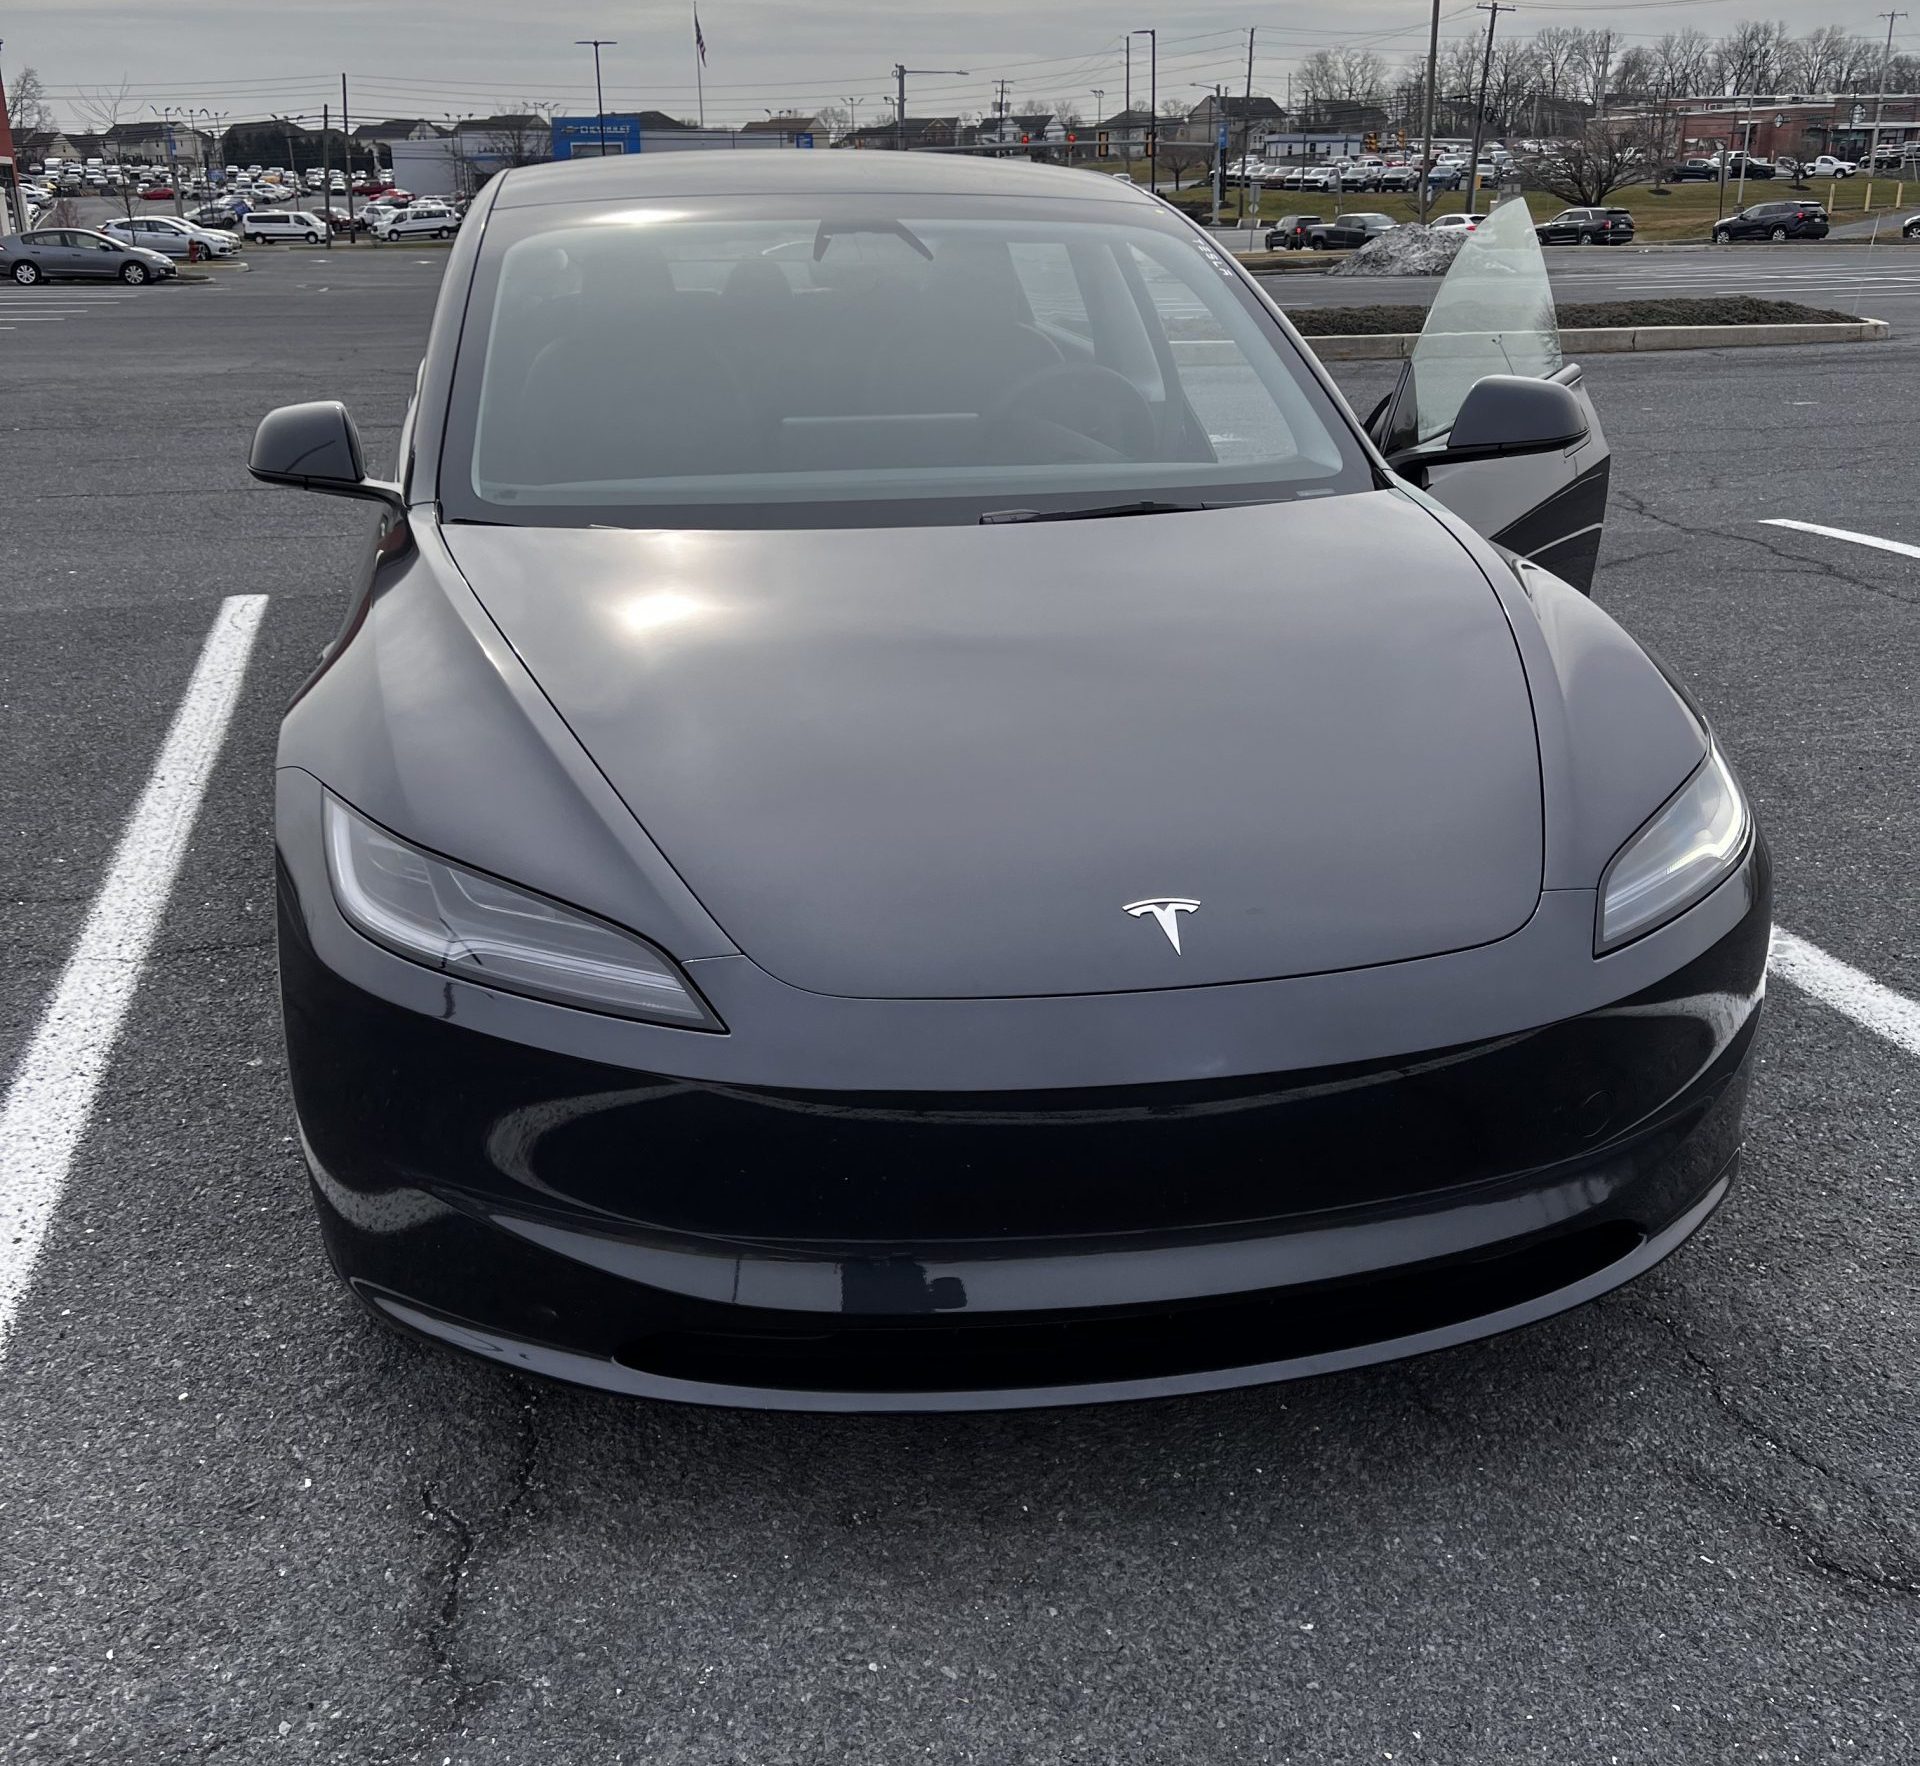 So what do we know about the Tesla Model 3 'Highland